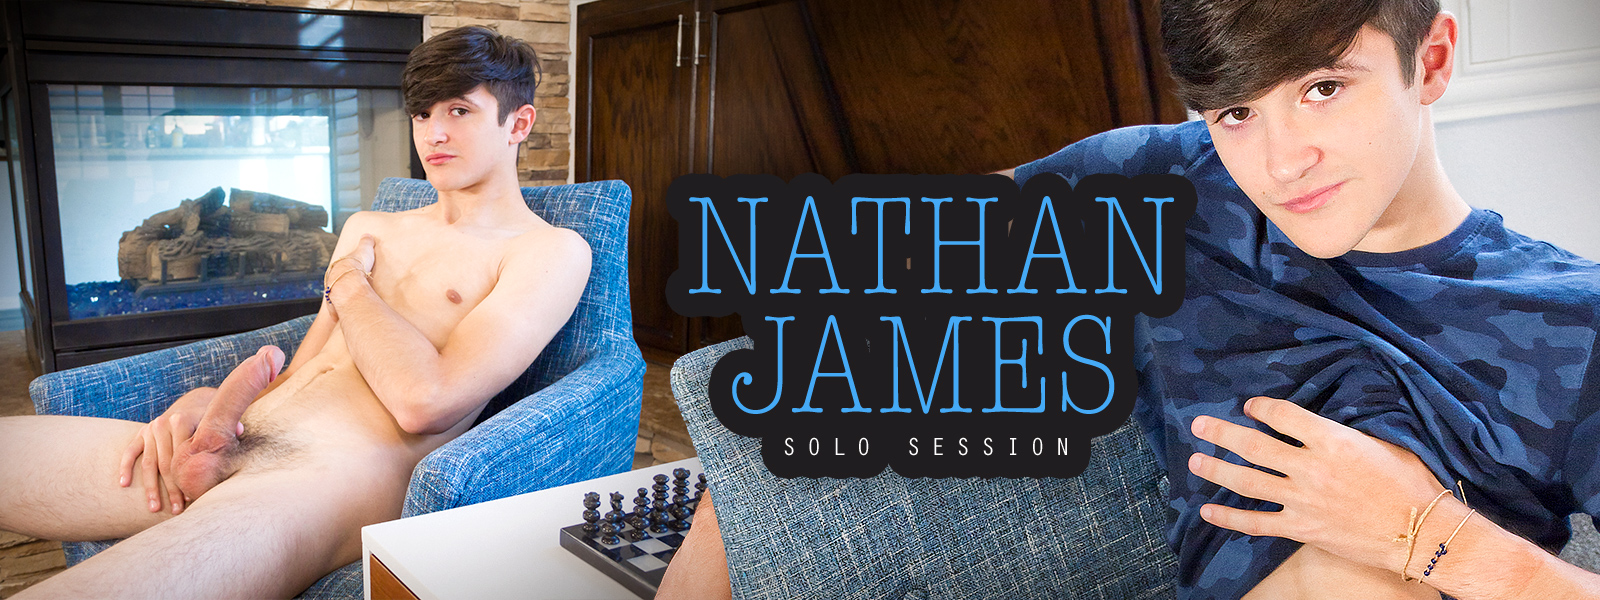 Nathan James Solo Session